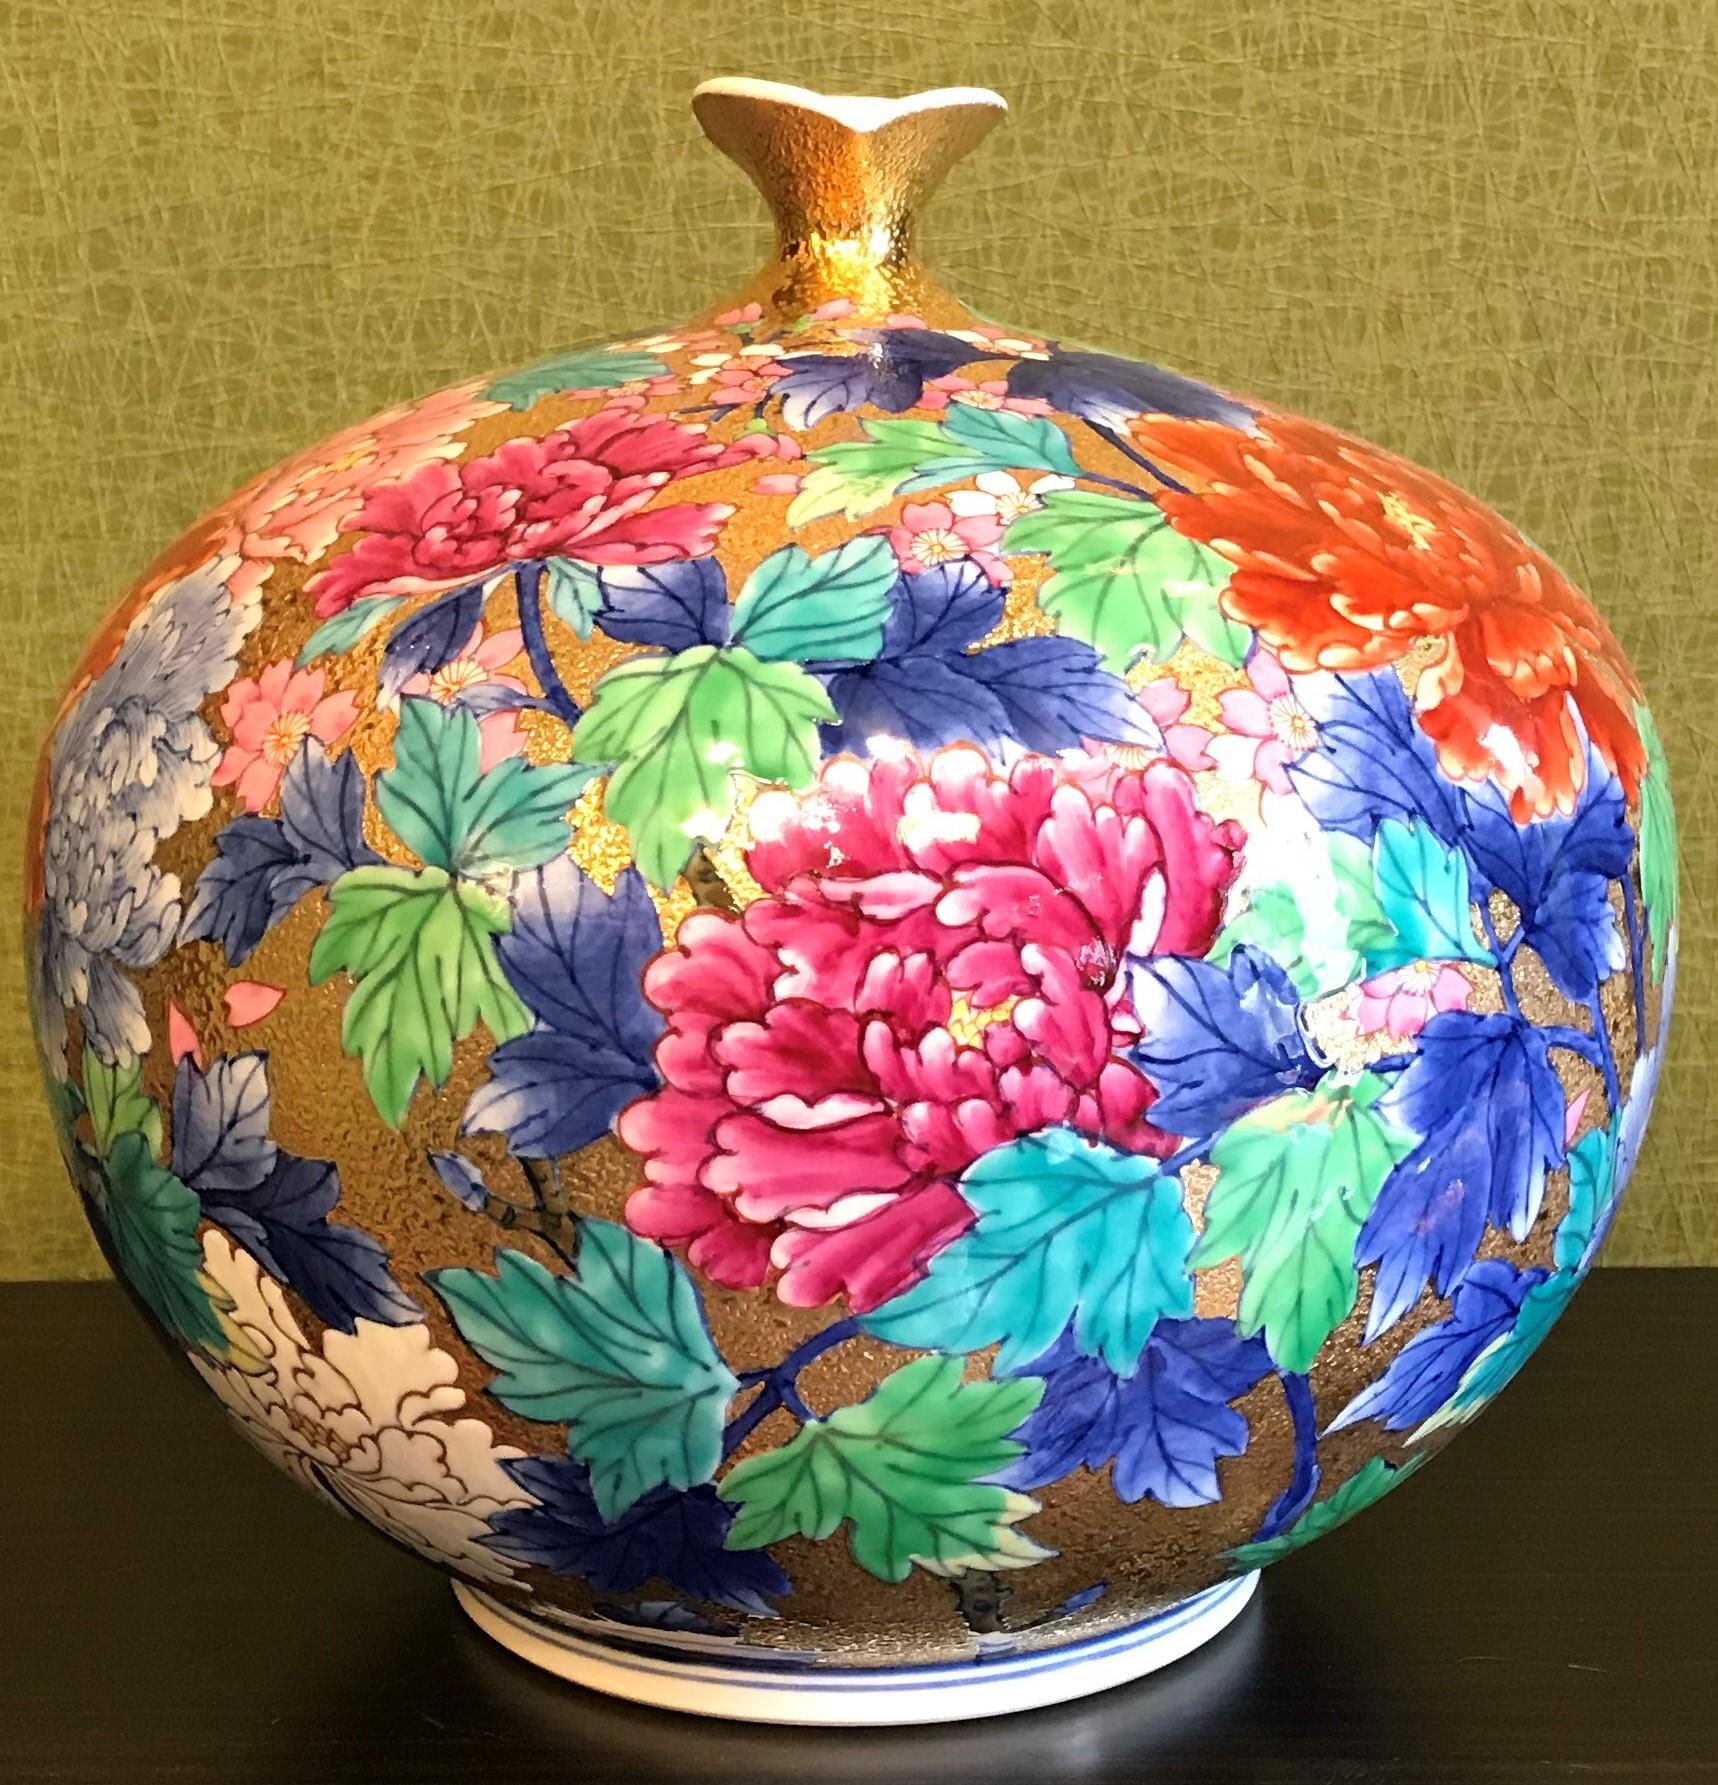 Breathtaking contemporary Japanese decorative porcelain vase, gilded ad hand painted on an attractively shaped ovoid body, a work by an acclaimed and award-winning master porcelain artist from the Imari-Arita region of Japan.
This artist is admired